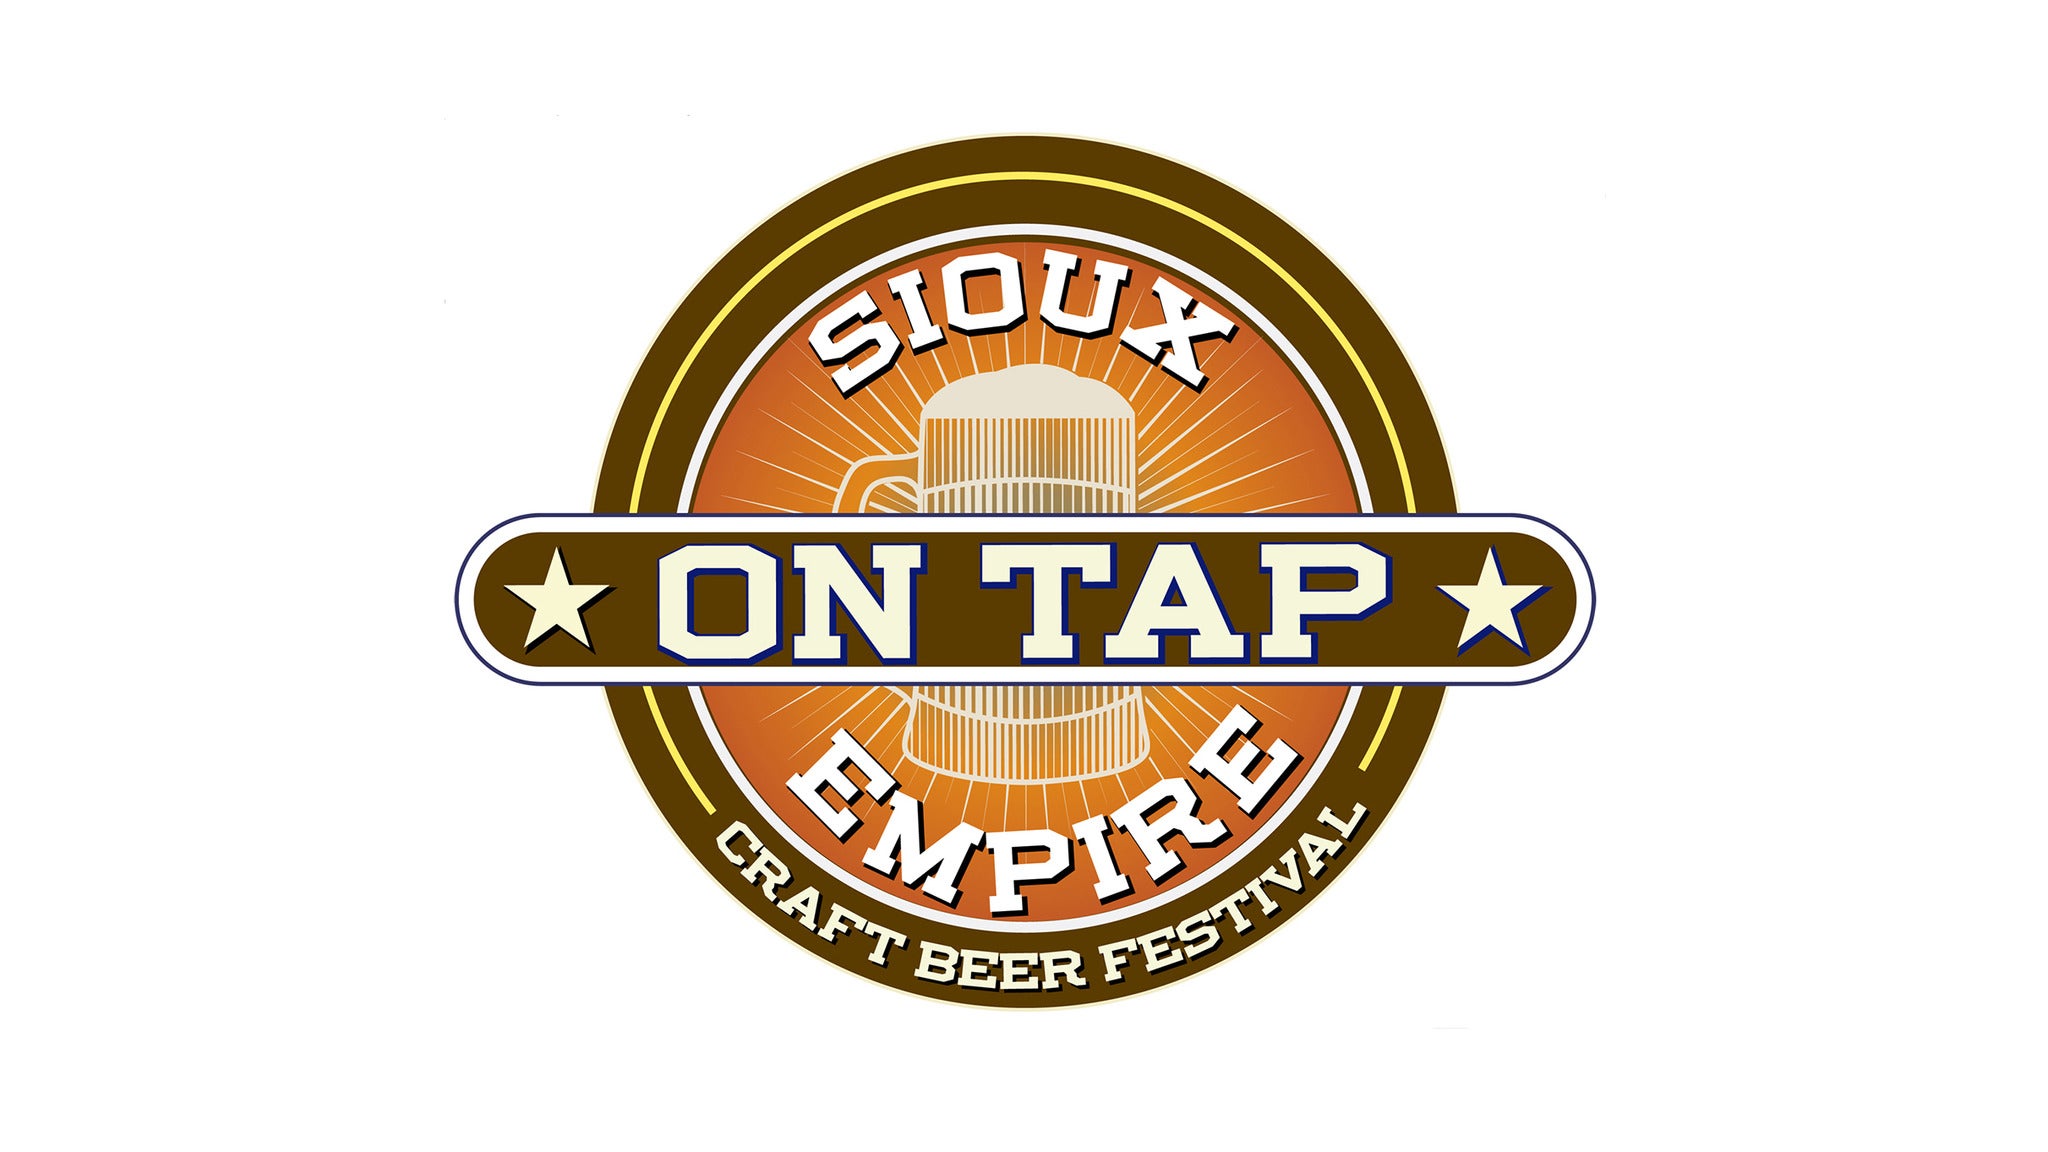 Sioux Empire On Tap in Sioux Falls promo photo for Black Friday Sale presale offer code